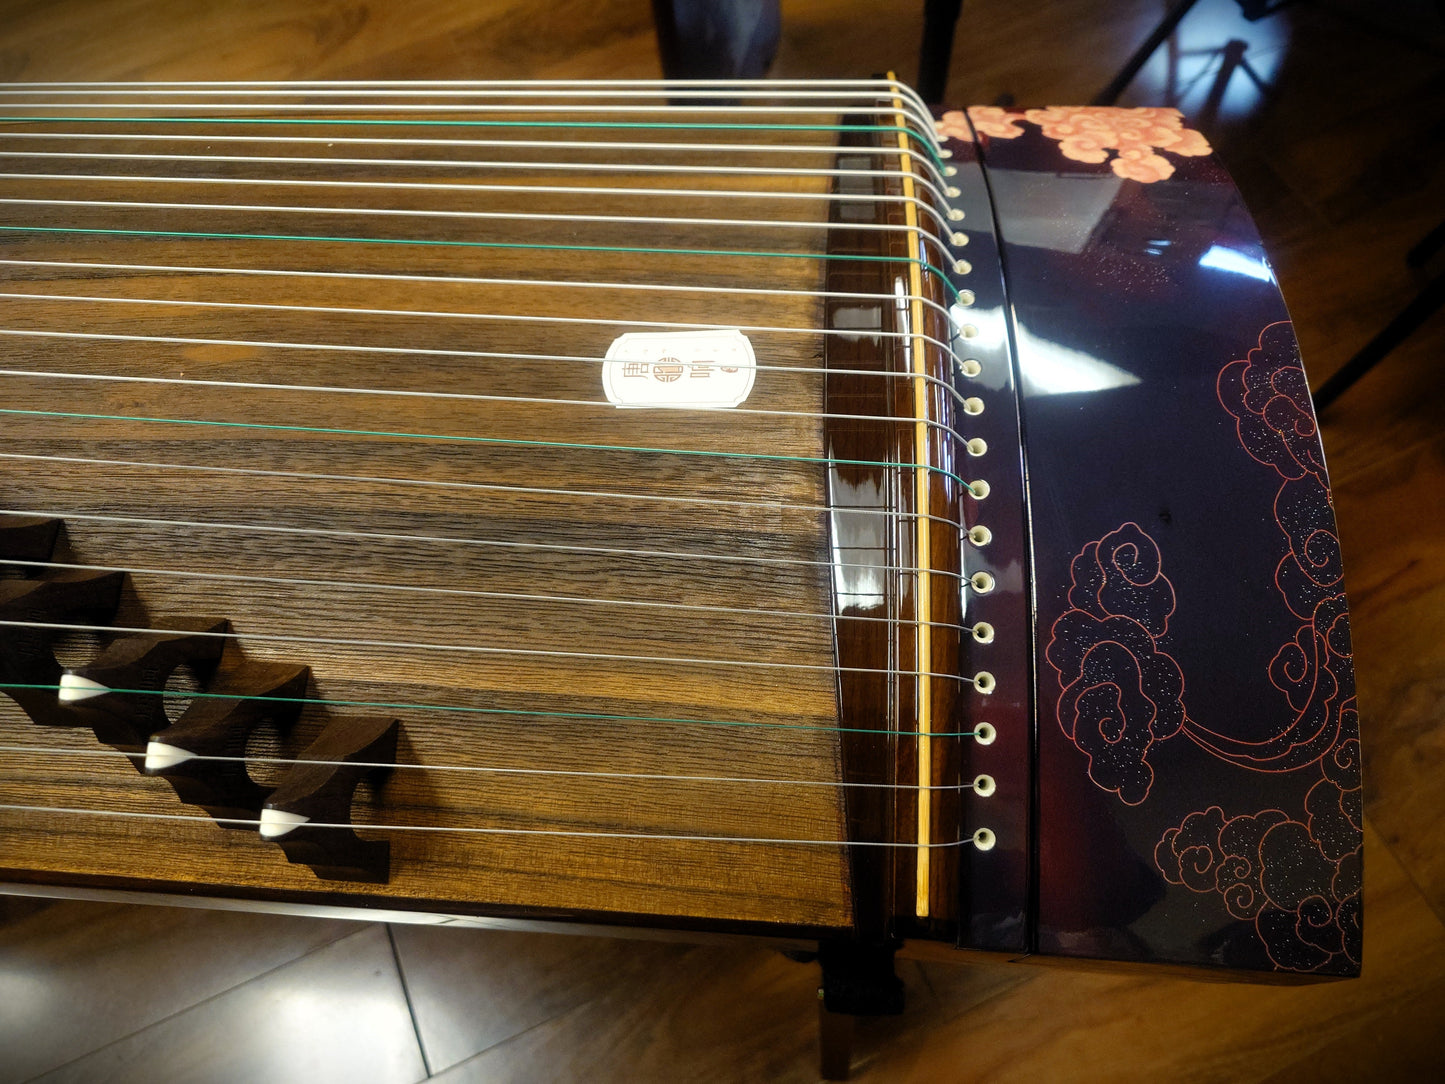 53" Tangxiang Concert South American Rosewood Guzheng "Soothing Cloud"